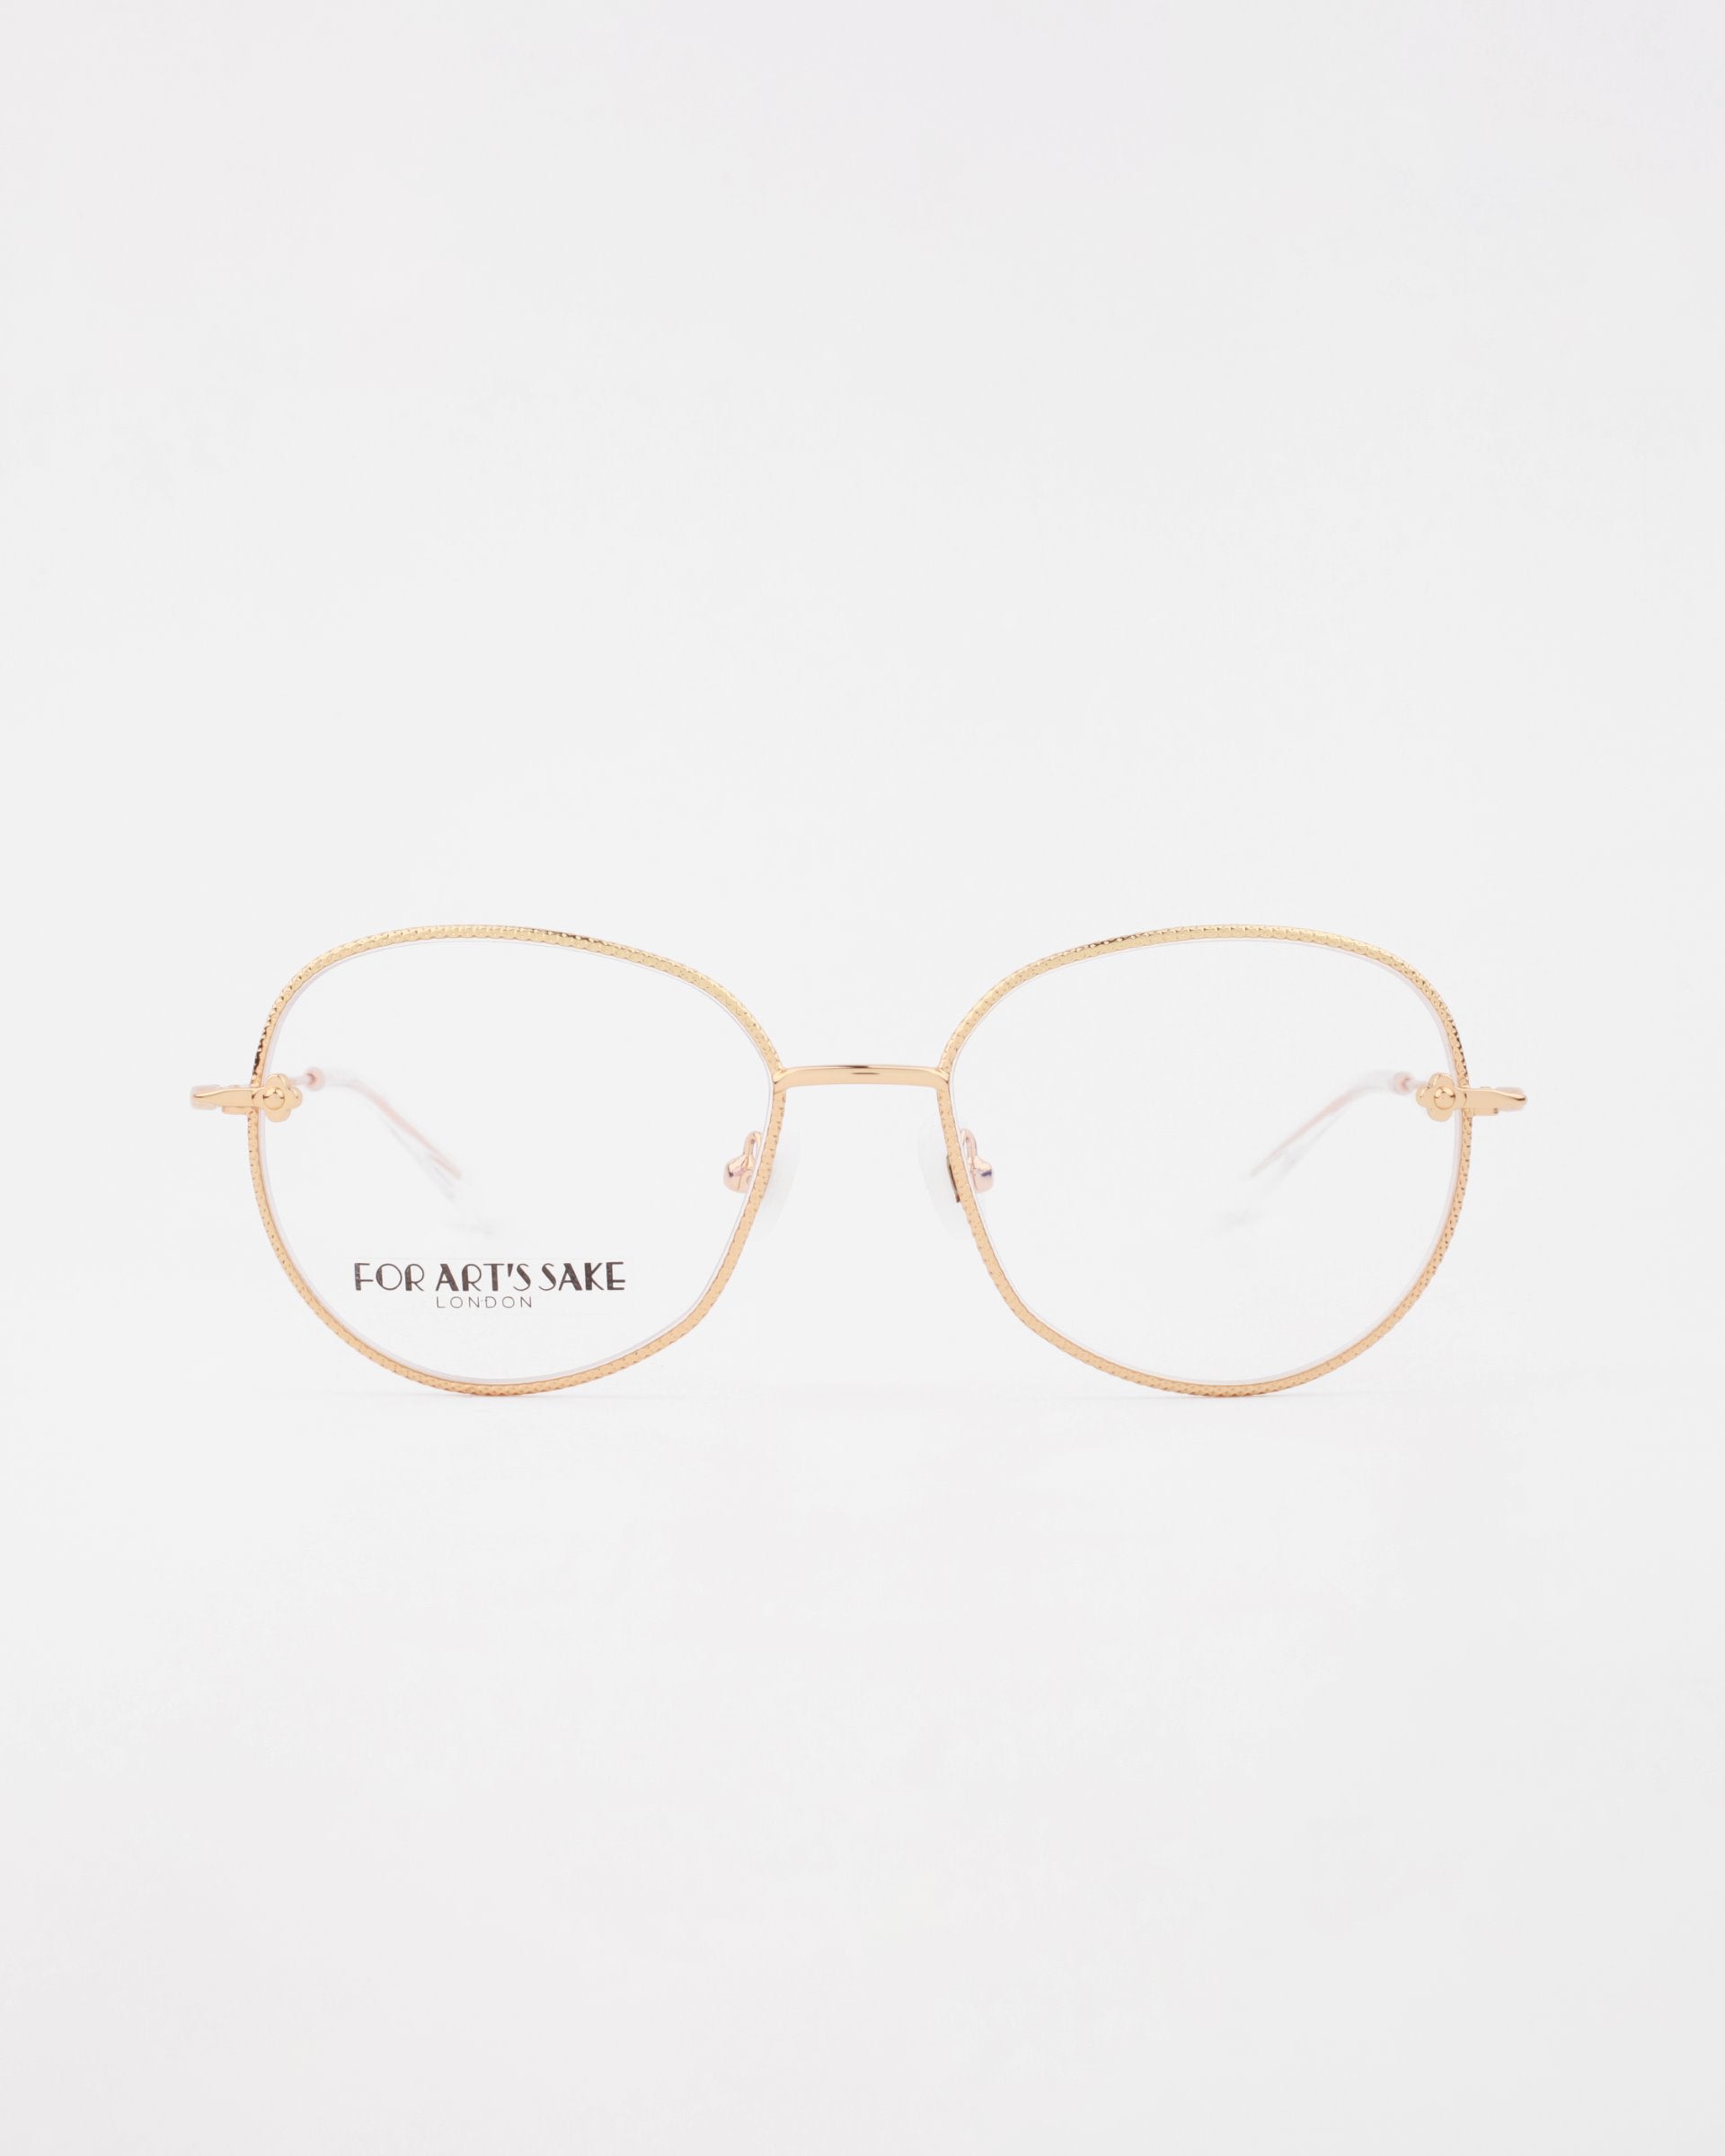 A pair of elegant handmade Jasmine eyeglasses with thin, gold-plated stainless steel frames against a white background. The frames have a square design with slightly rounded edges. The left lens has the brand name &quot;For Art&#39;s Sake®&quot; printed in black text.